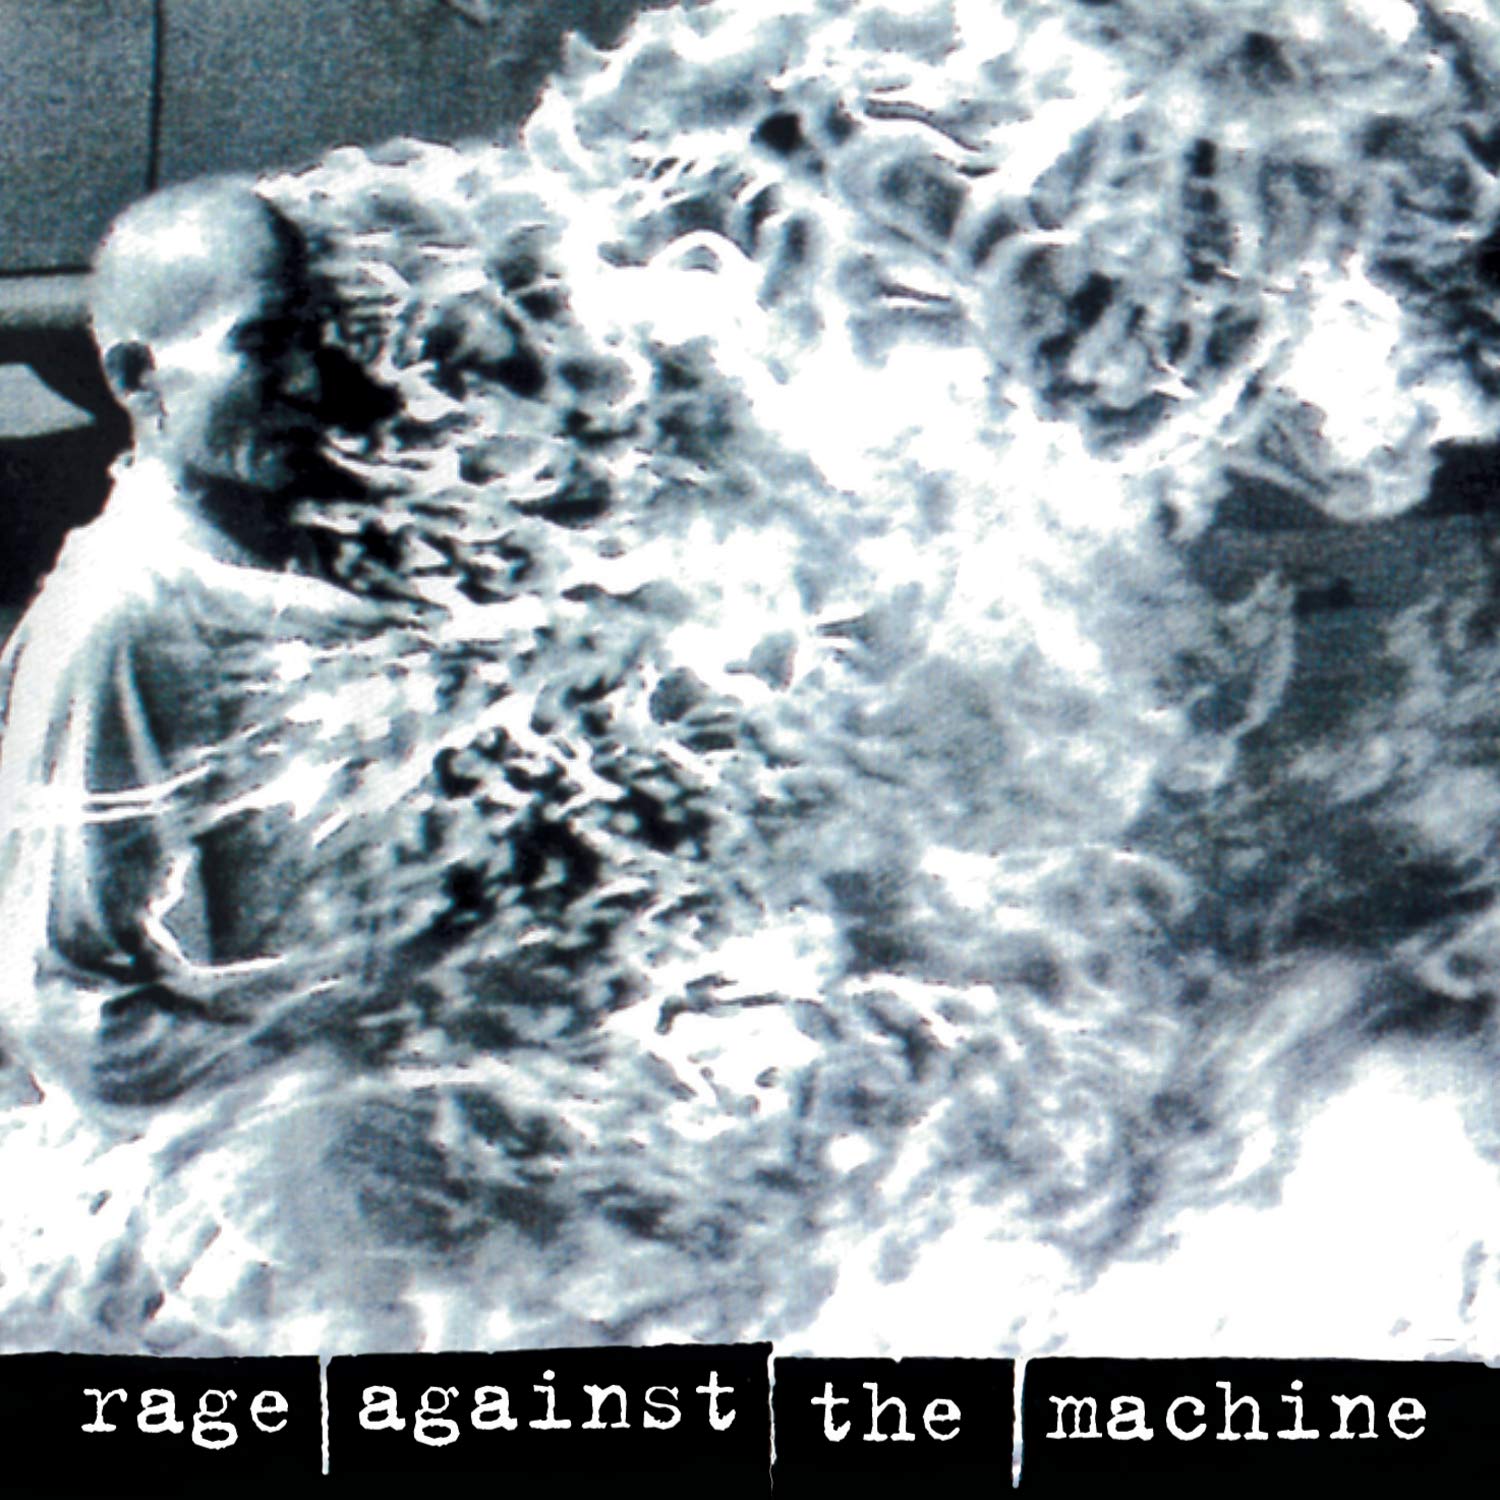 Rage Against the Machine self-titled album cover